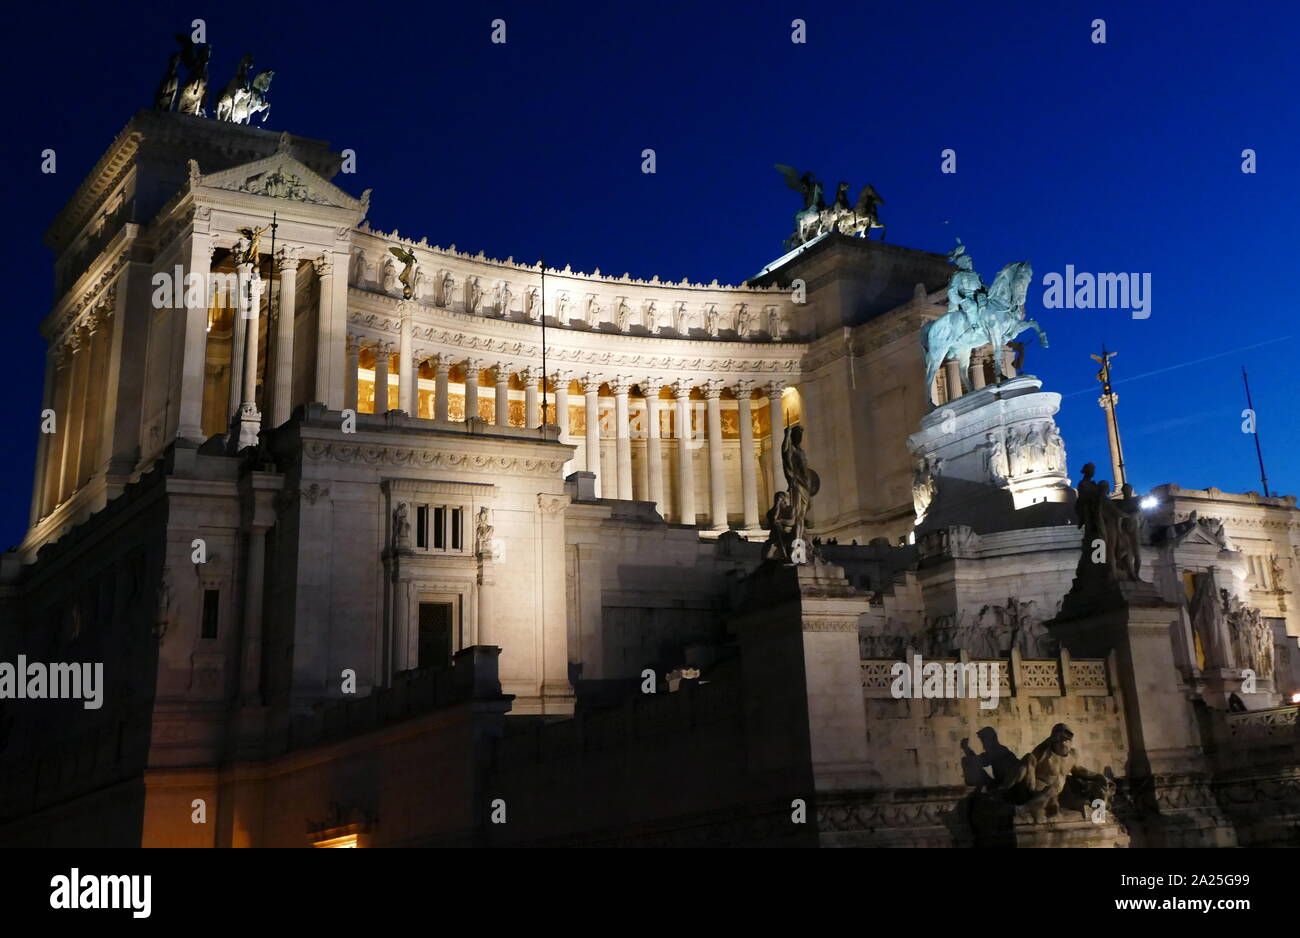 View of the Vittorio Emanuele II Monument at night. The Vittorio Emanuele II Monument, also known as the Vittoriano, Il Vittoriano, or Altare della Patria, is a monument built in honour of Victor Emmanuel II, the first king of a unified Italy, located in Rome, Italy. Stock Photo